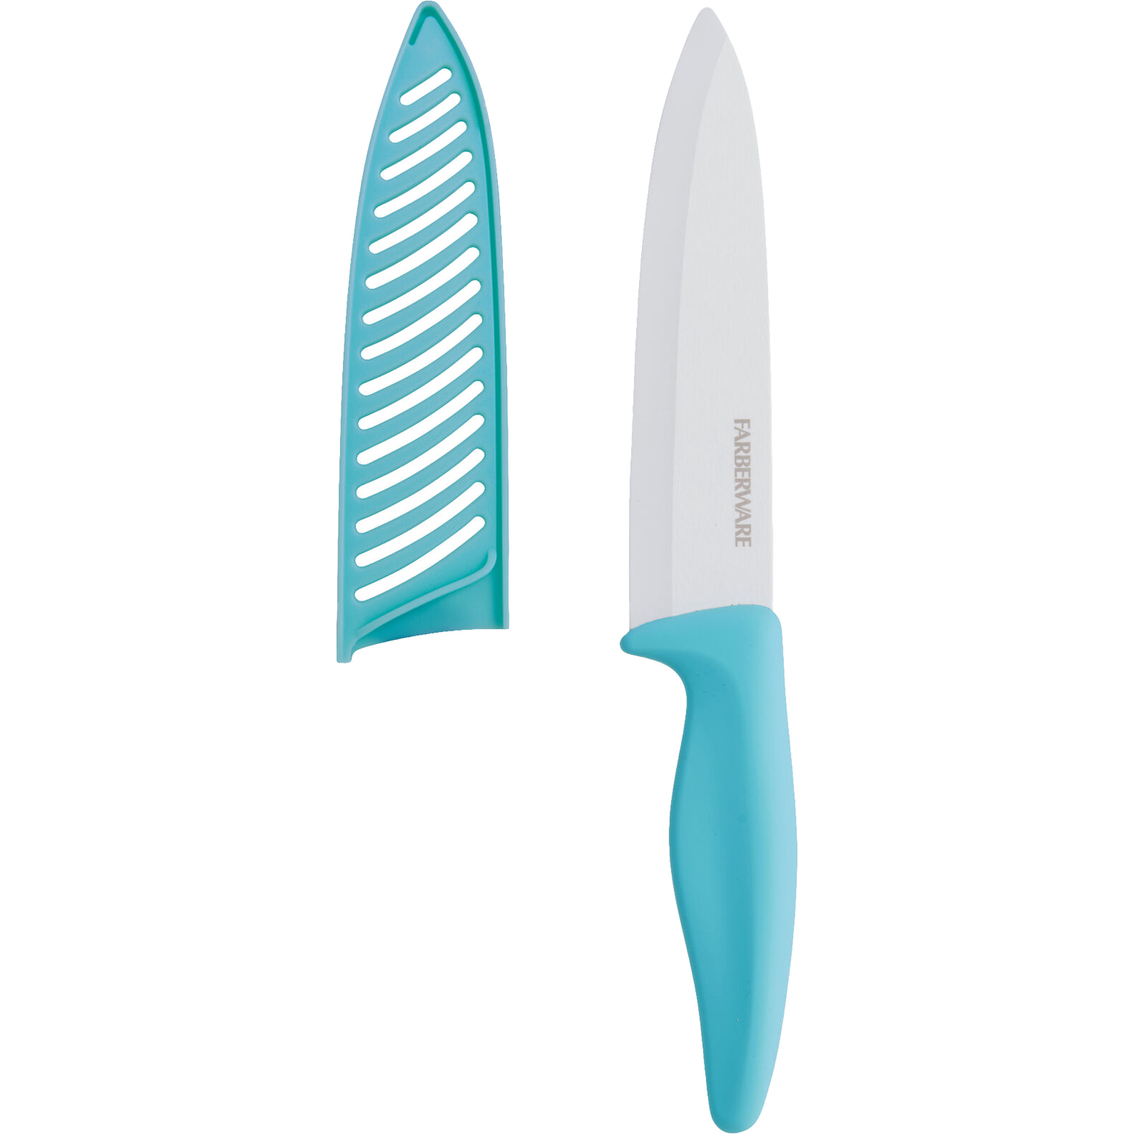 Farberware Chef's Knife Kitchen Knives & Cutlery Accessories